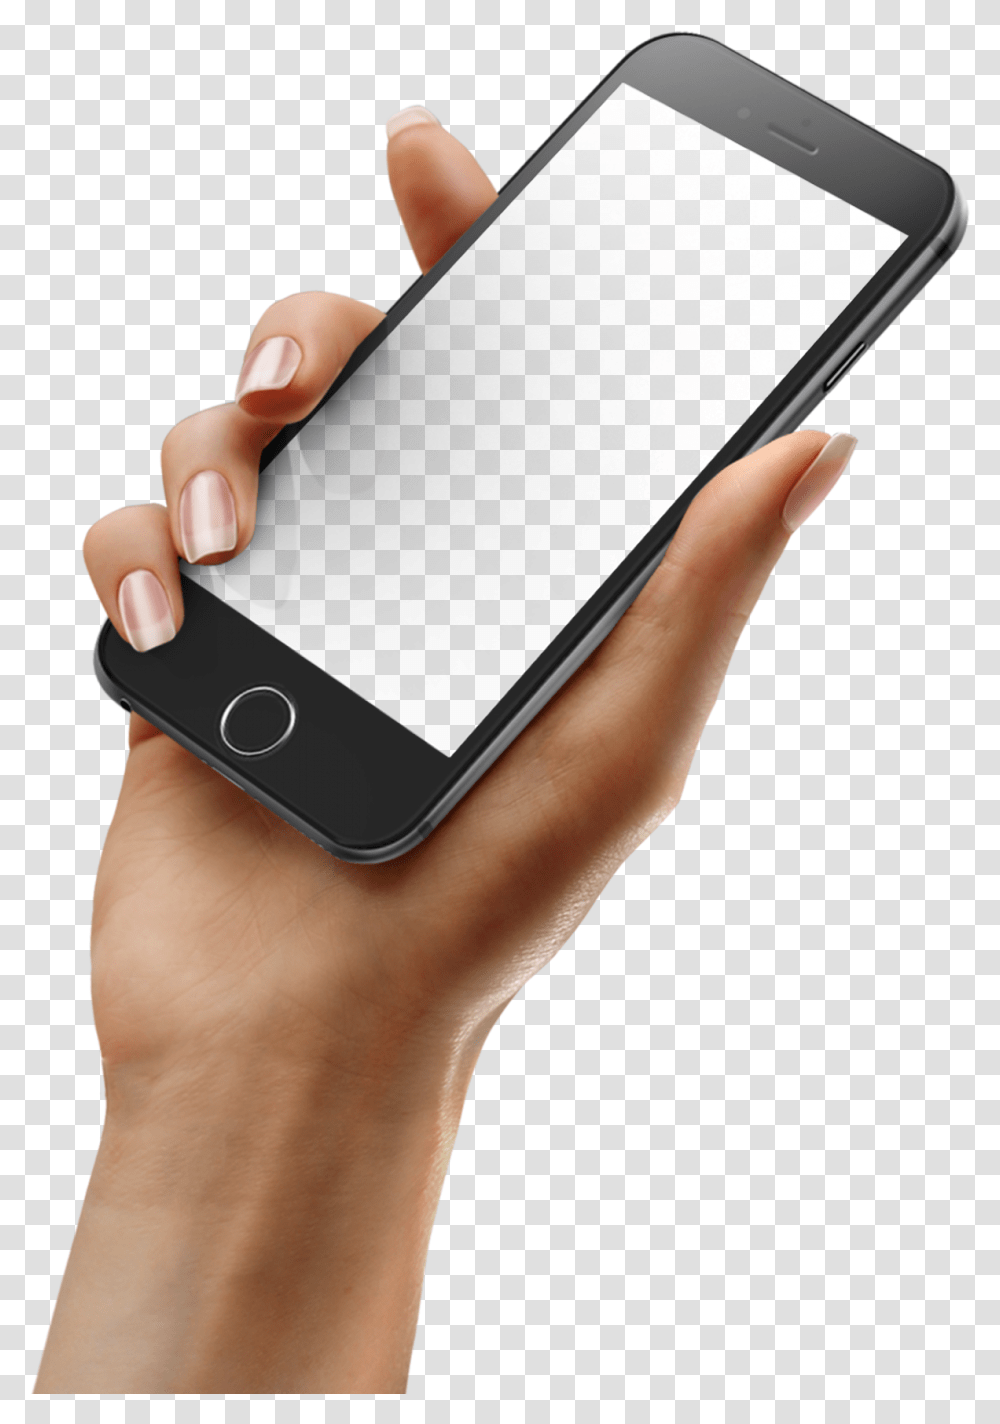 Iphone In Hand Image Free Download Searchpngcom Mockup Iphone Hand, Mobile Phone, Electronics, Cell Phone, Person Transparent Png